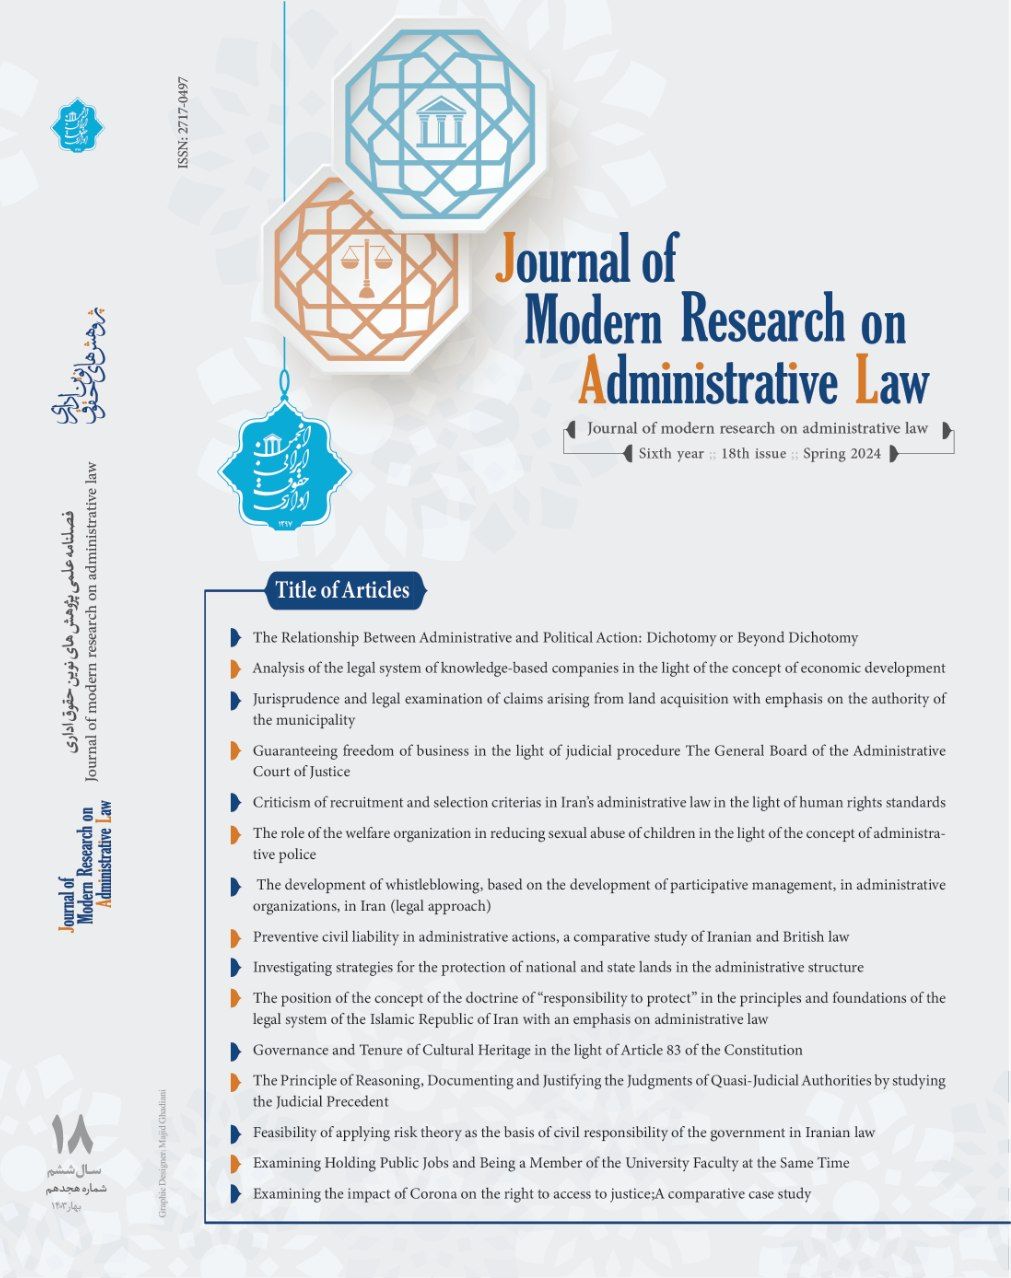 The Journal of Modern Research on Administrative Law